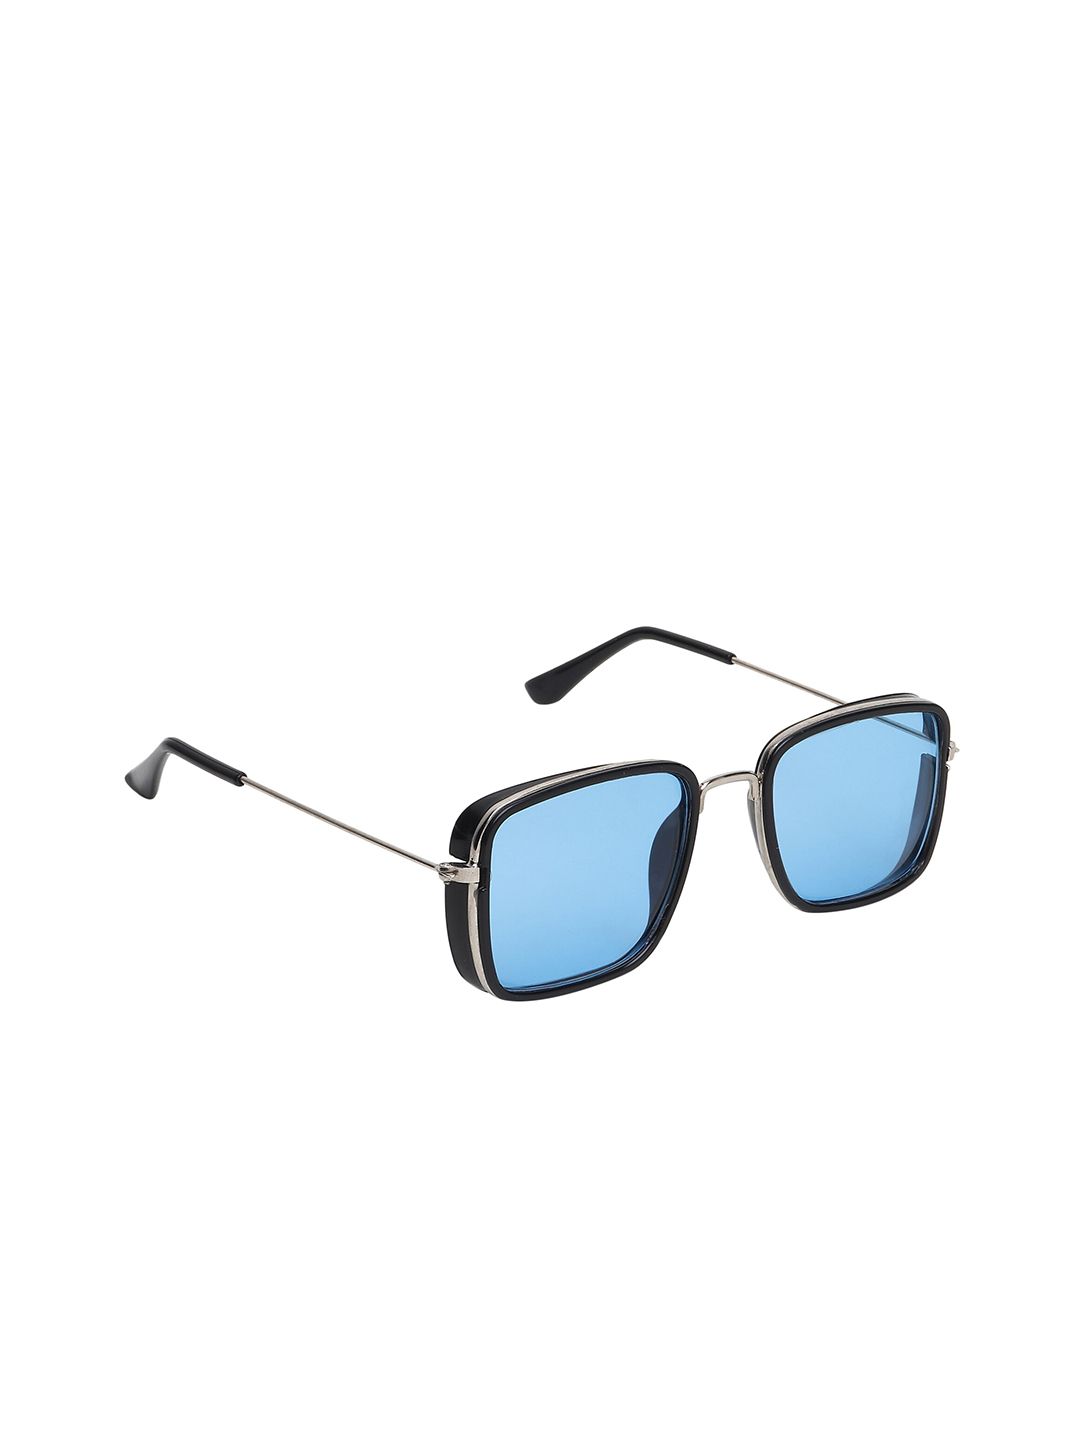 CRIBA Unisex Blue Lens & Gold-Toned Square Sunglasses with UV Protected Lens Price in India